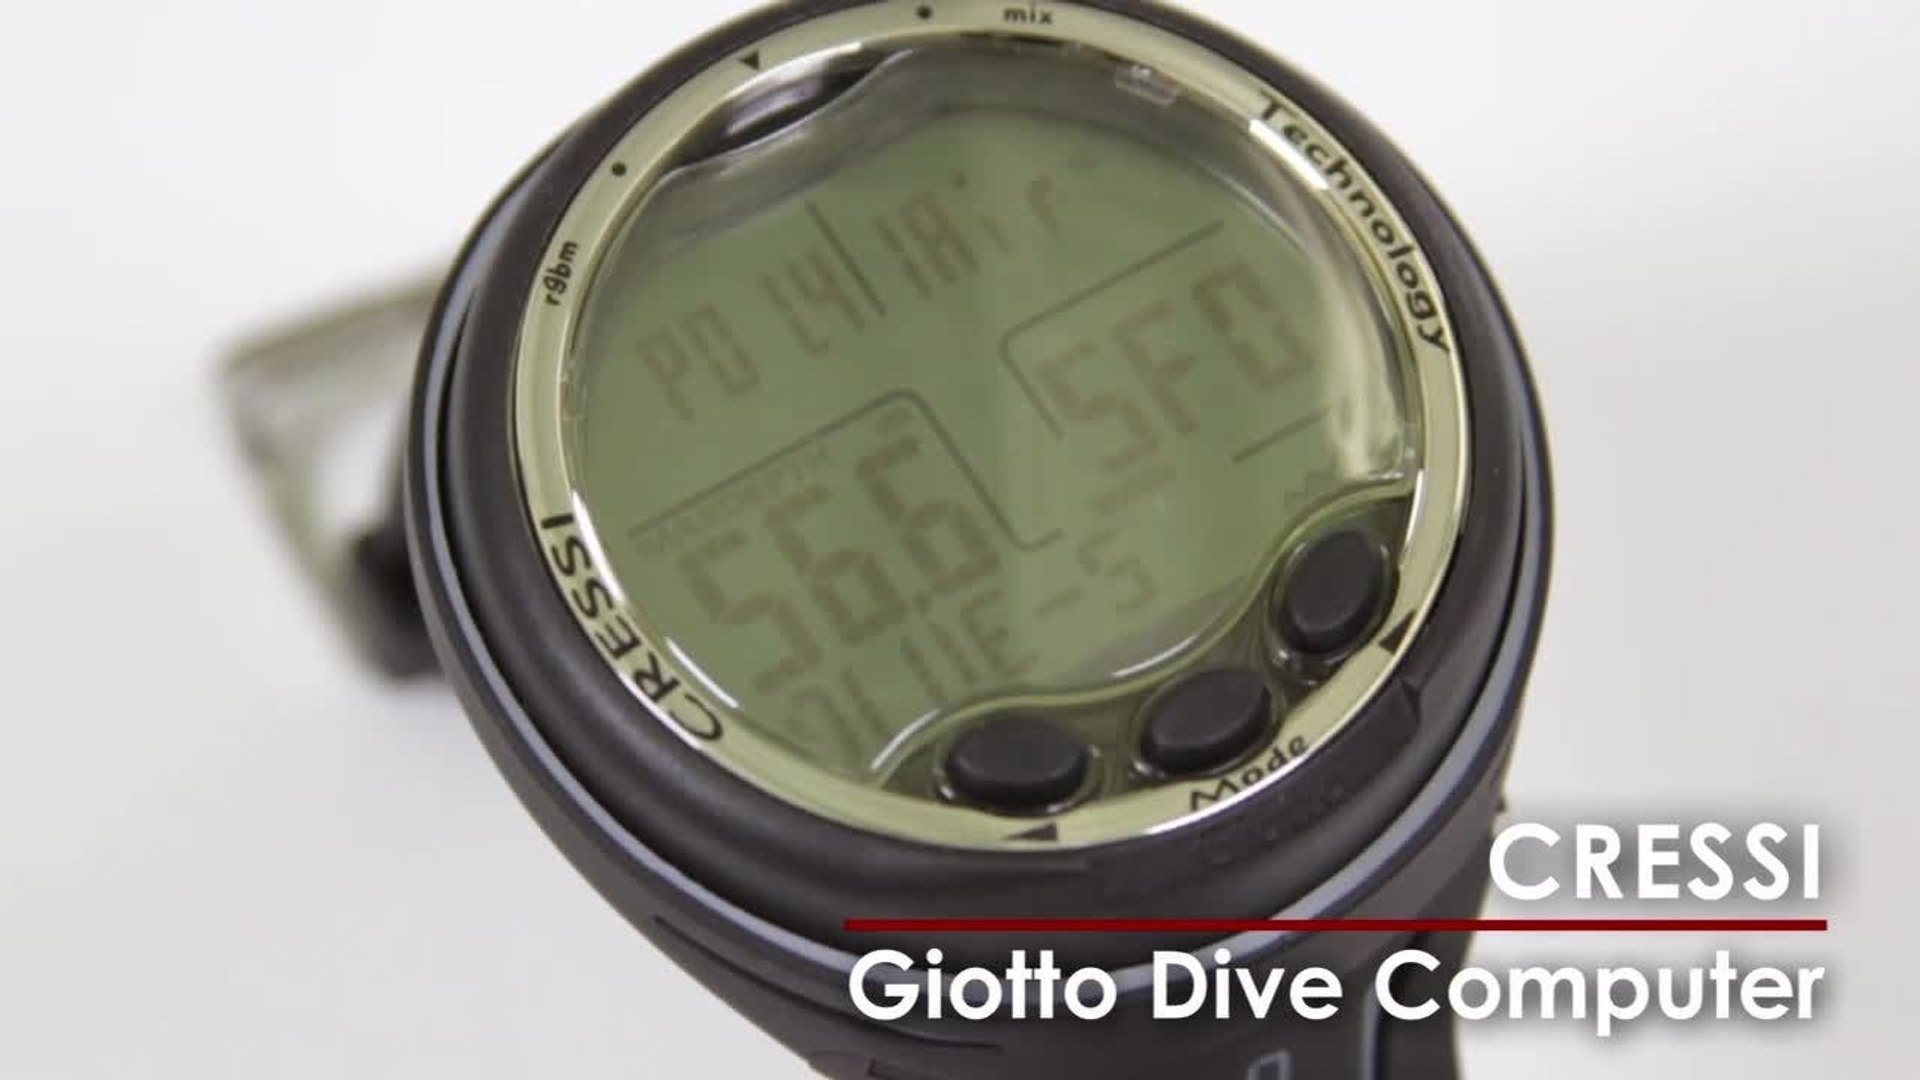 60:Second ScubaLab - Cressi Giotto Dive Computer - video Dailymotion